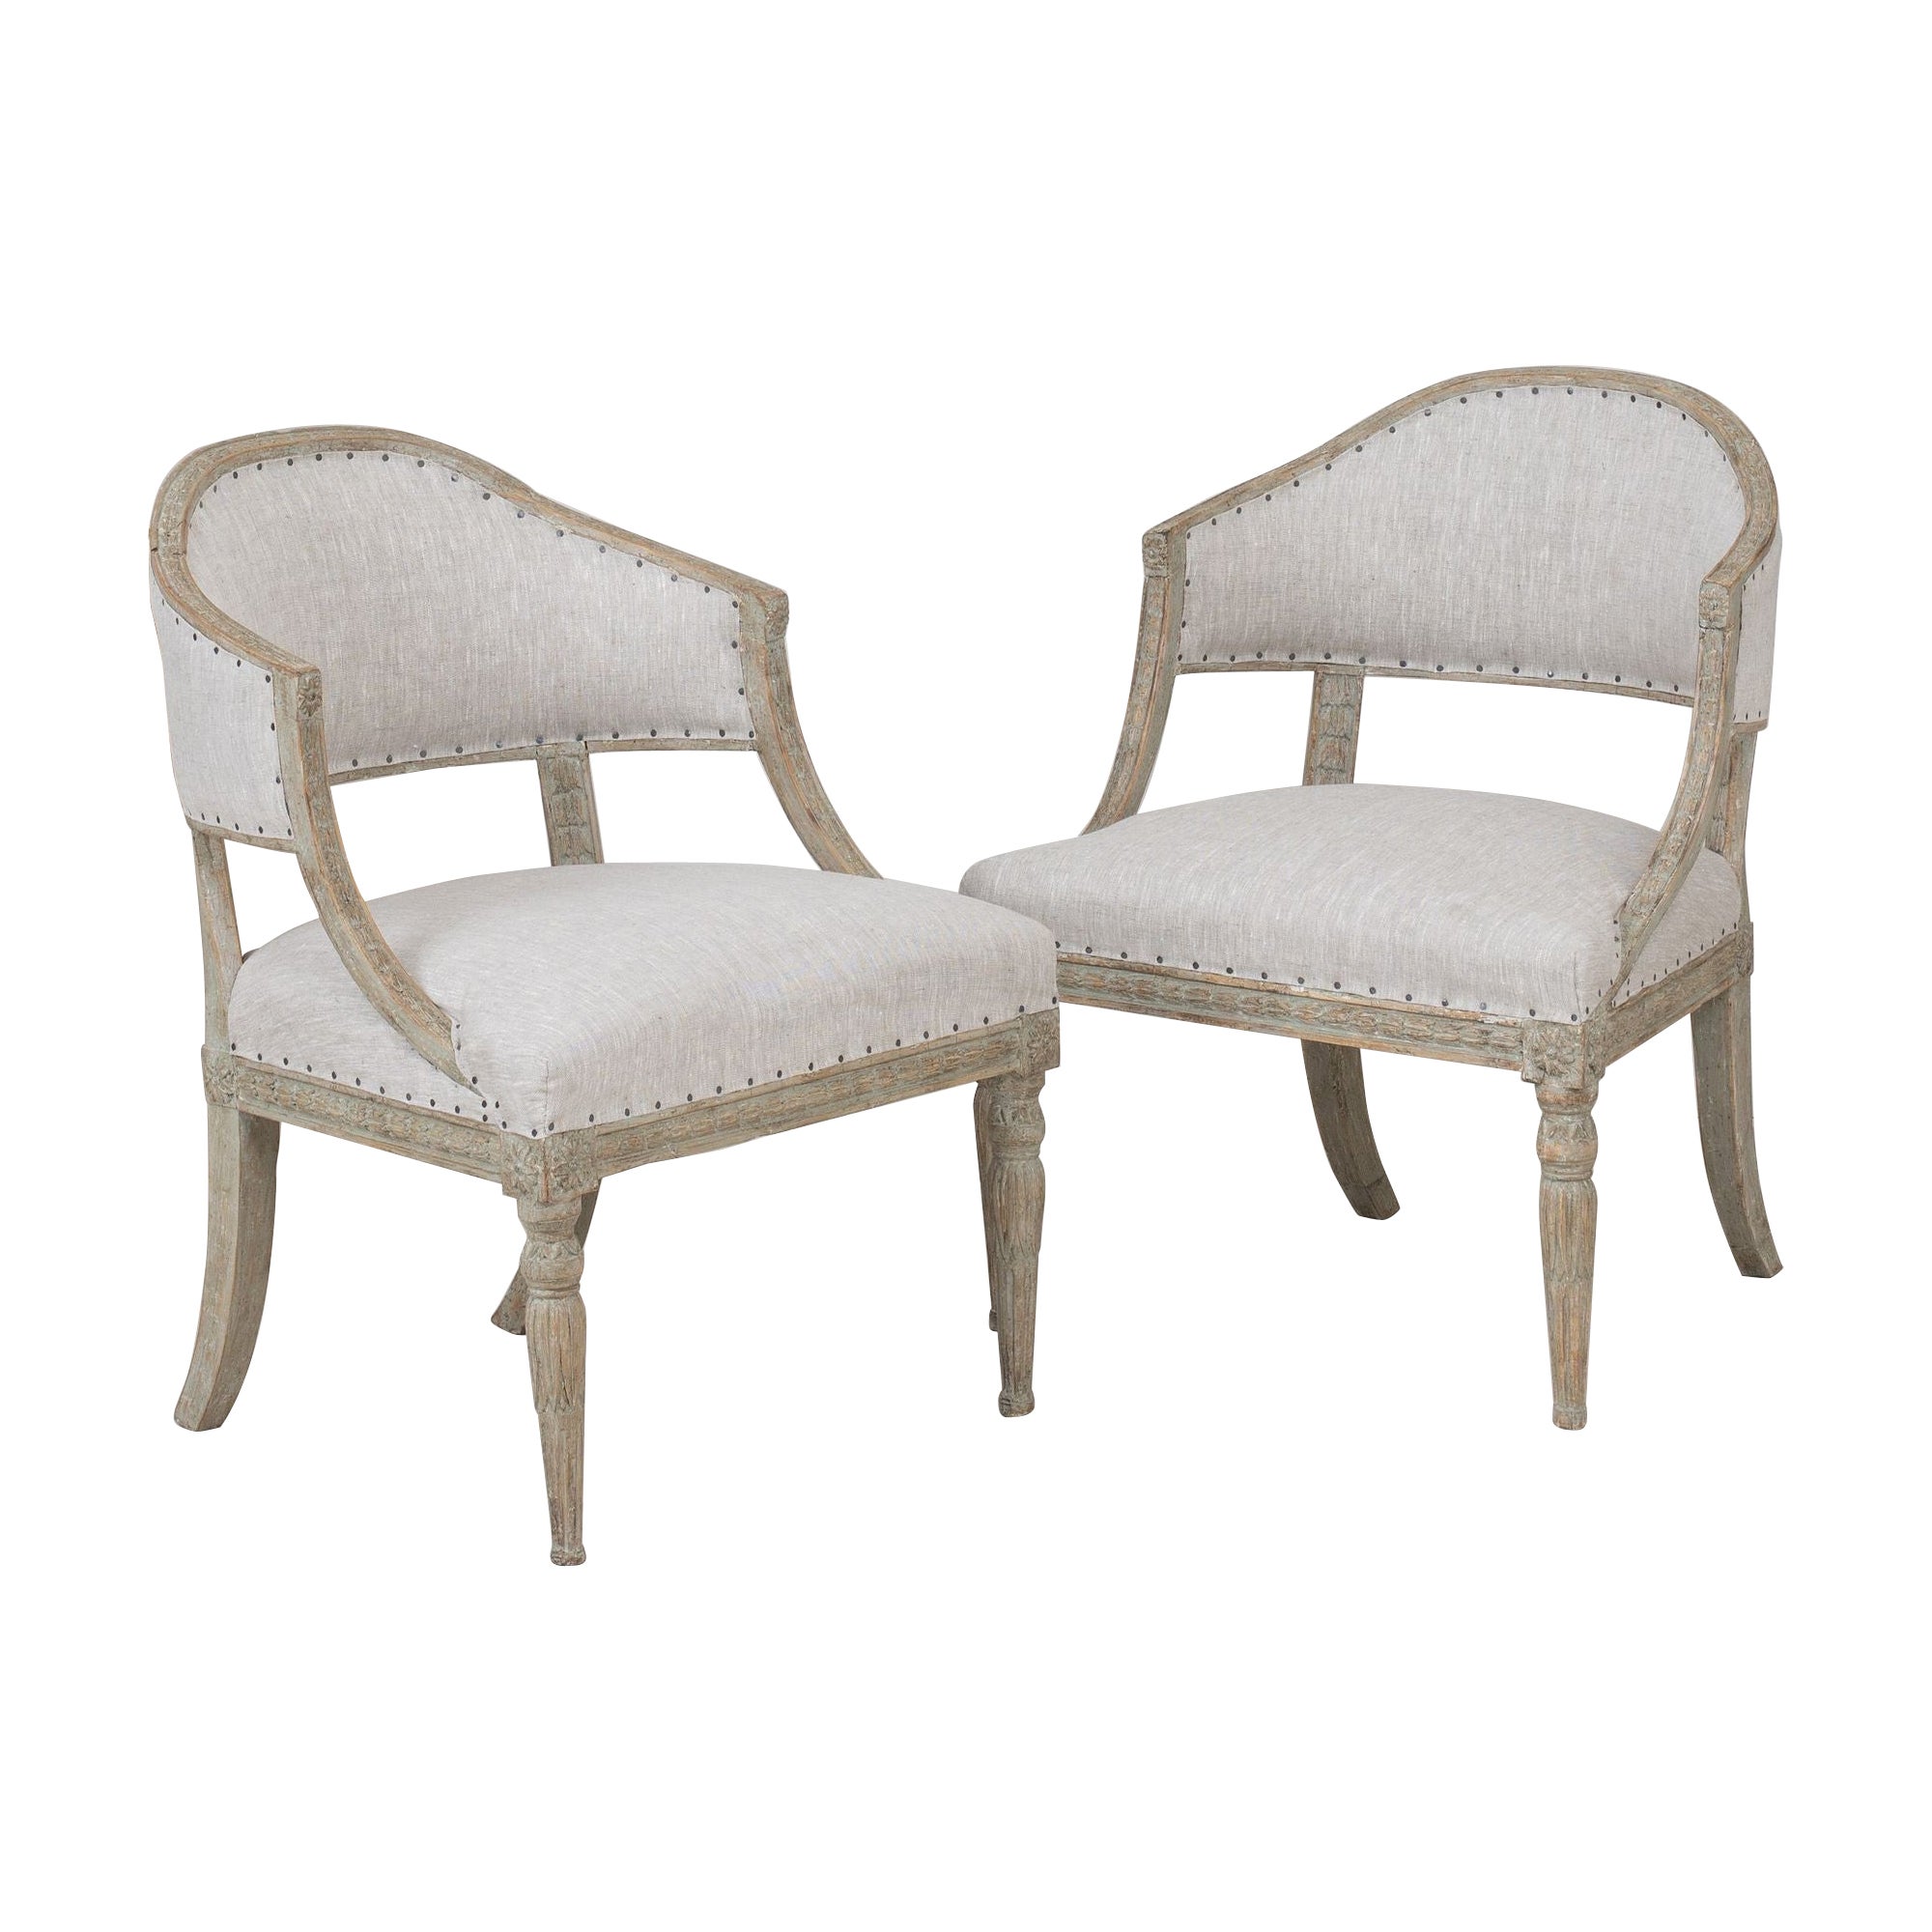 19th c. Pair of Swedish Gustavian Painted Barrel Back Armchairs For Sale